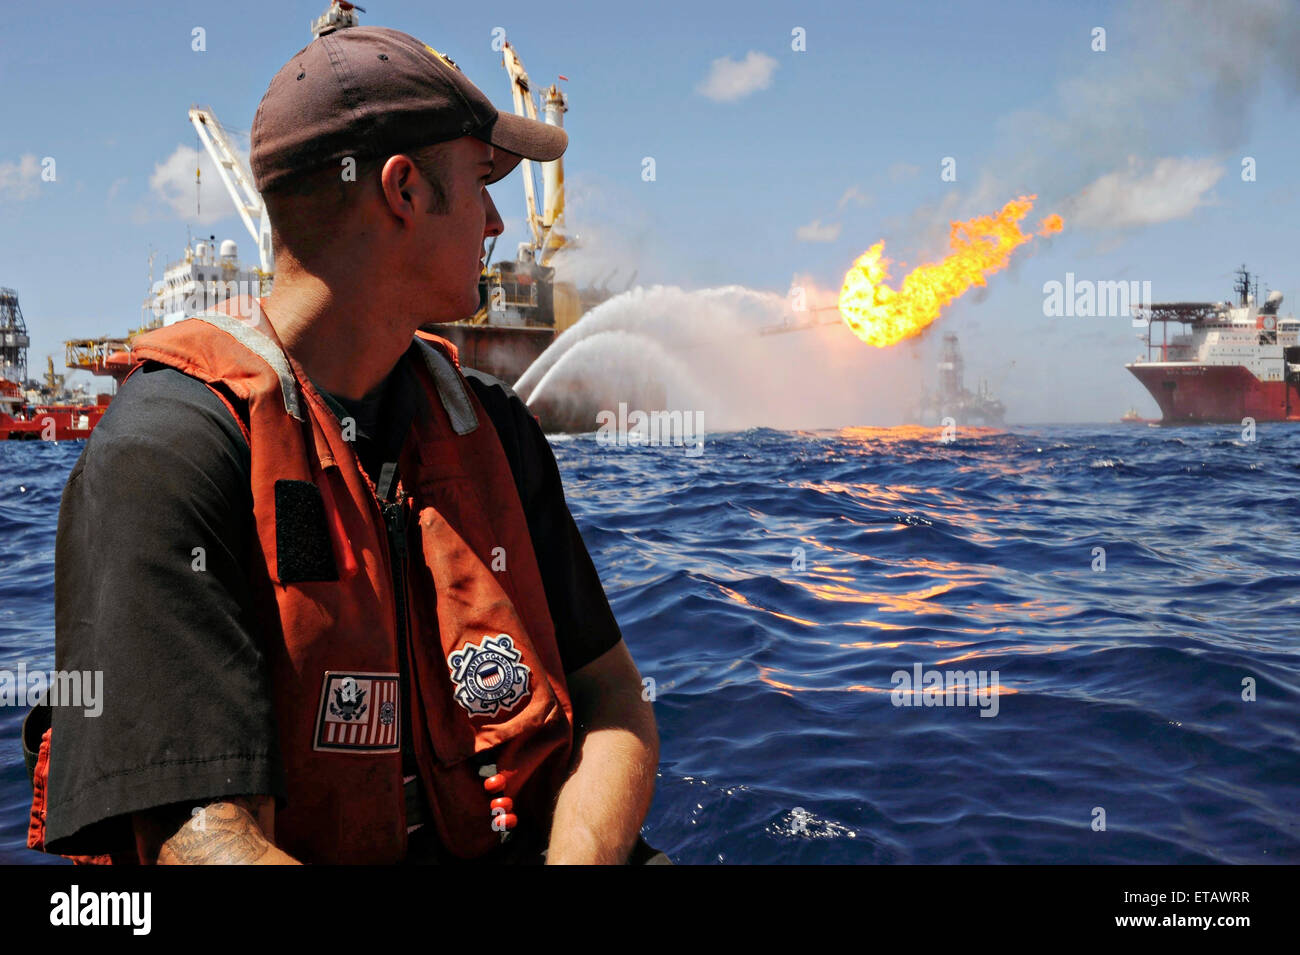 A Coast Guard officer watches the mobile offshore drilling unit Q4000 work to control the damaged Deepwater Horizon as crews work to plug the wellhead and flare excess gas and oil flowing from the well July 8, 2010 in the Gulf of Mexico. Stock Photo